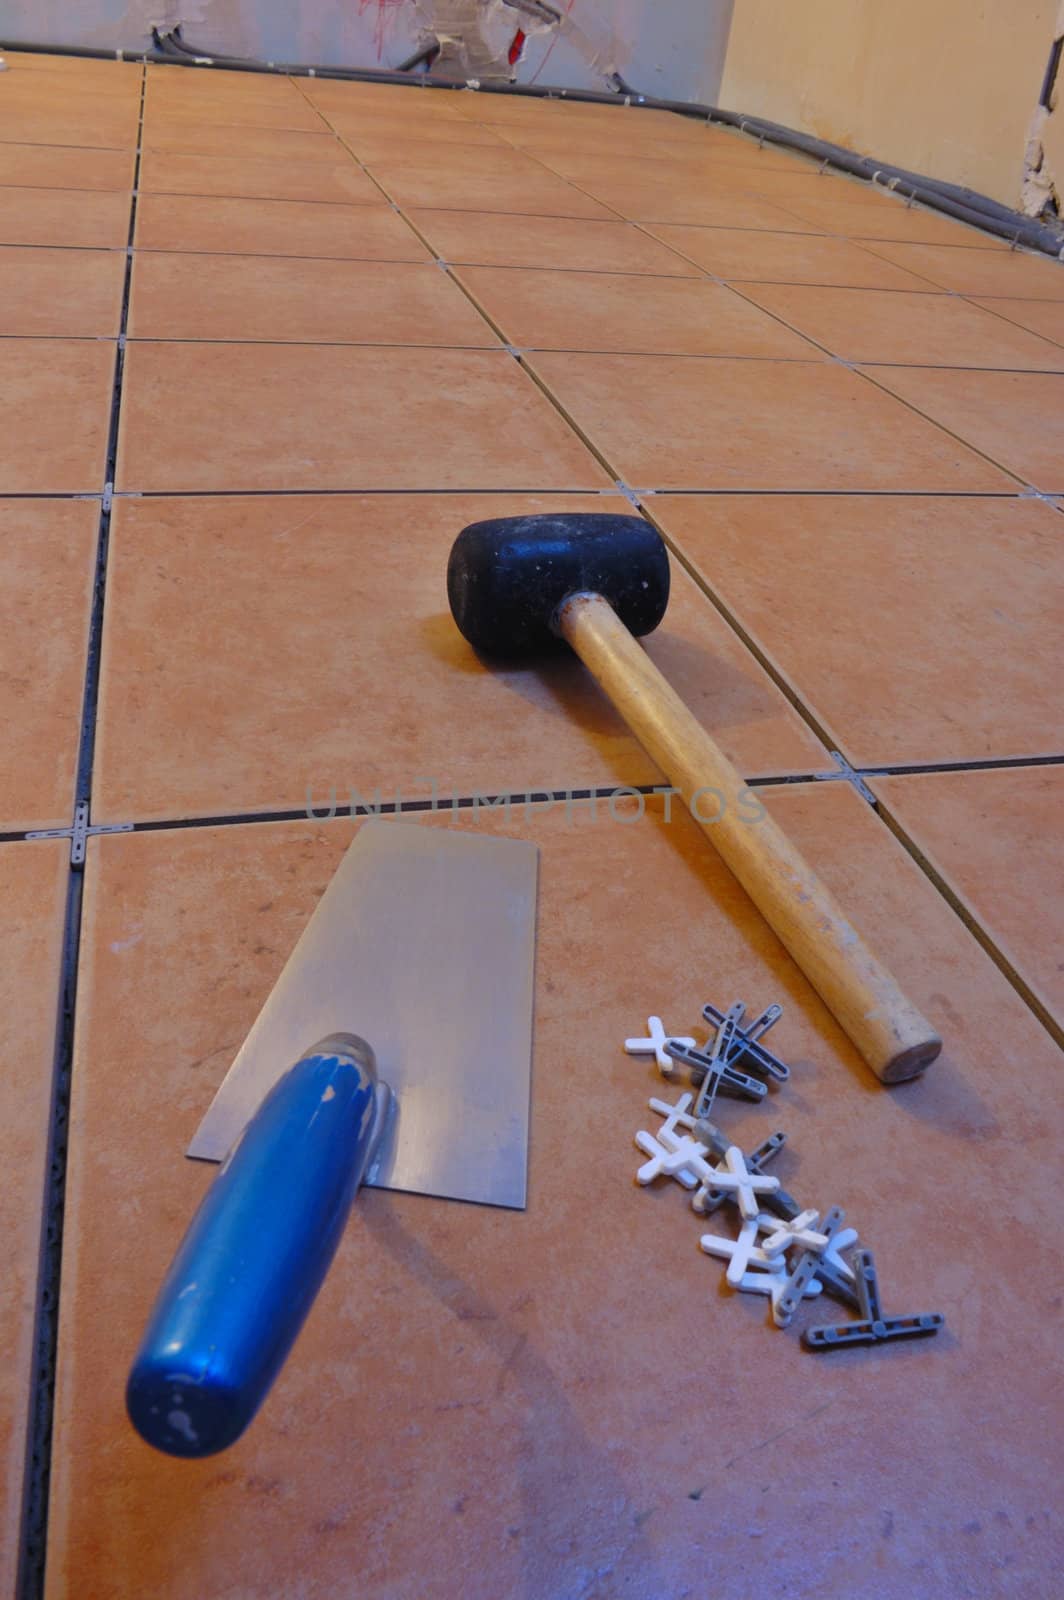 Close up of a workman's tools on a floor that is being tiled. More work in progress visible in background.